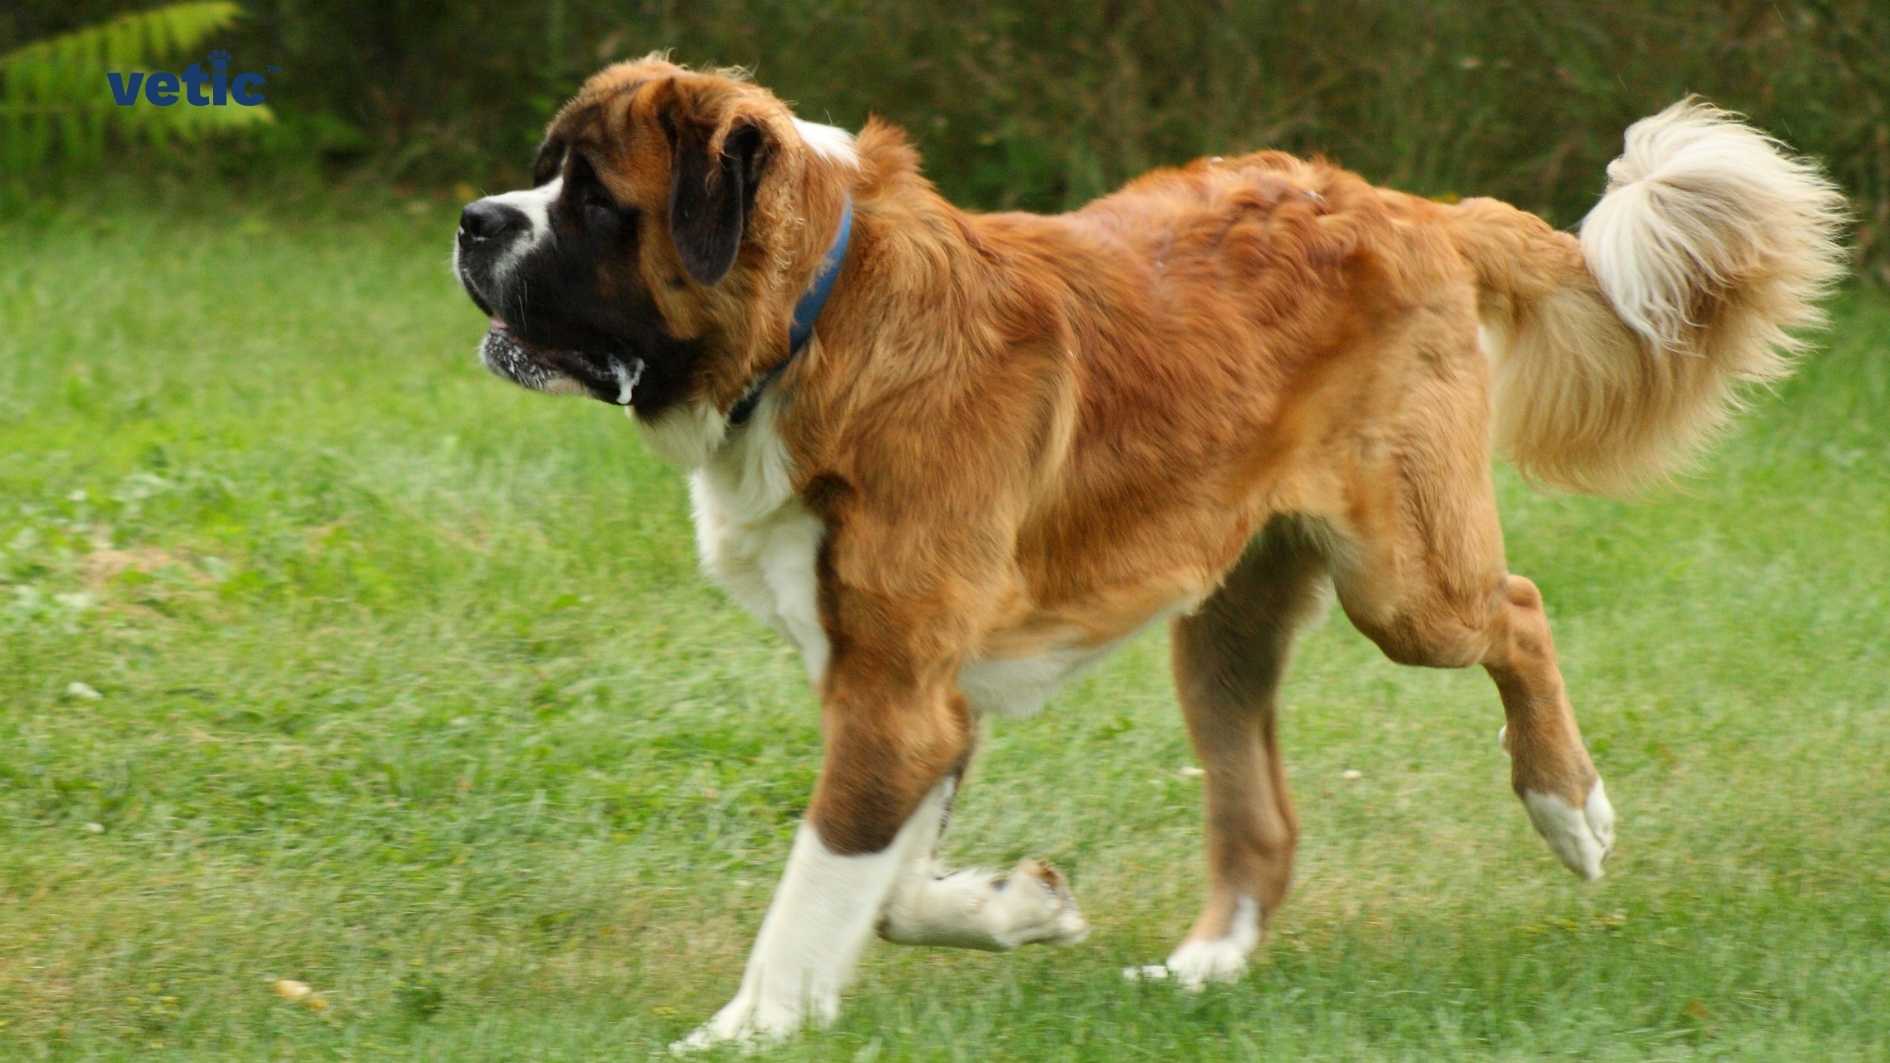 A Saint Bernard dog with a mix of brown, white, and black fur is walking on a grassy field; the word ‘vetic’ is visible in the top left corner.